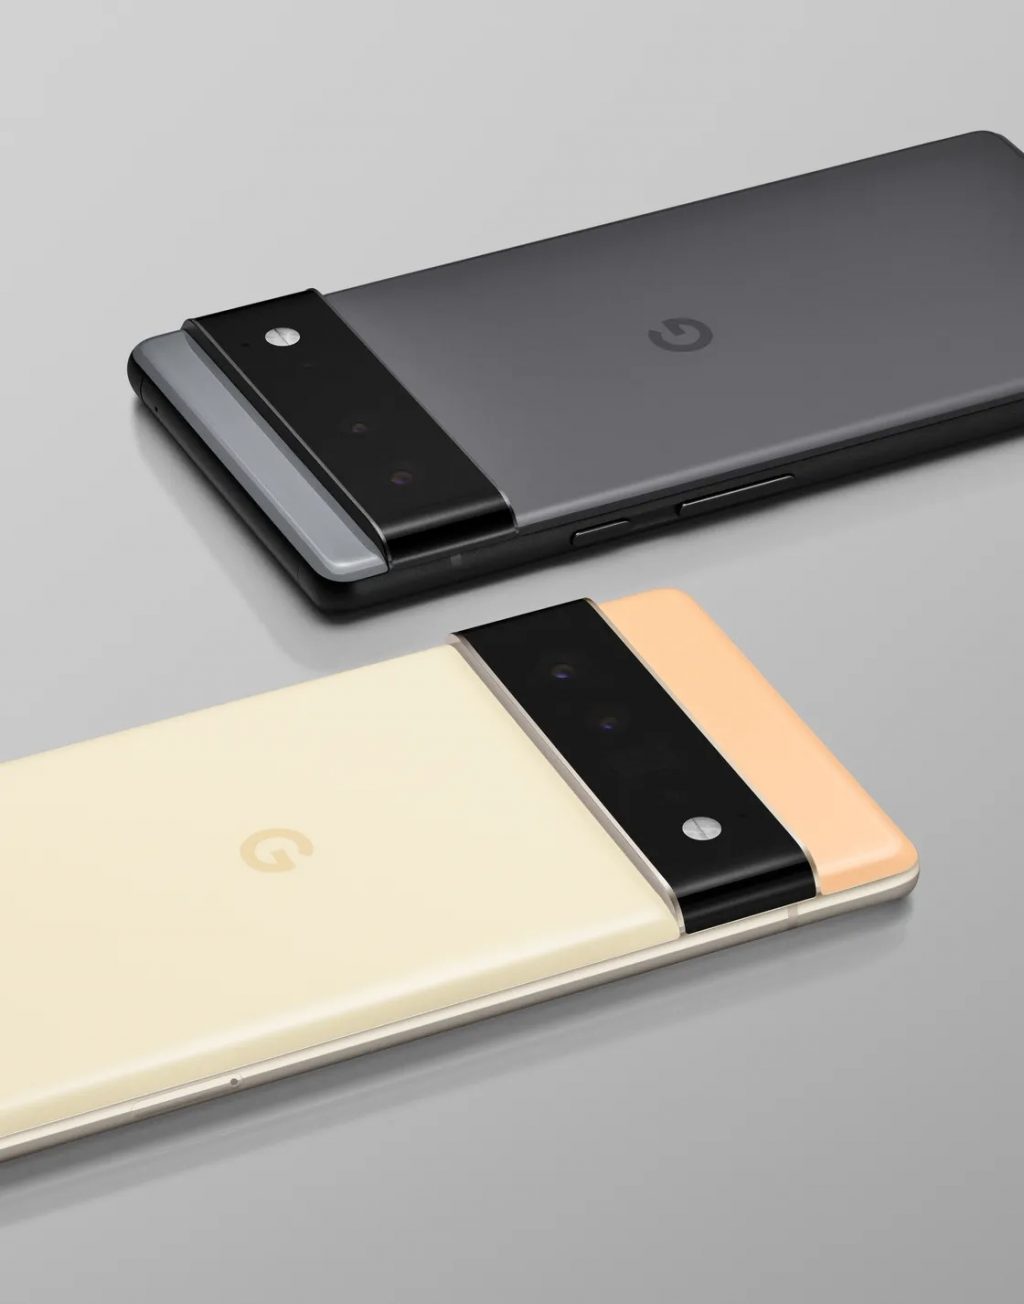 Pixel 6 and 6 Pro: Google releases feature-rich videos on new phones